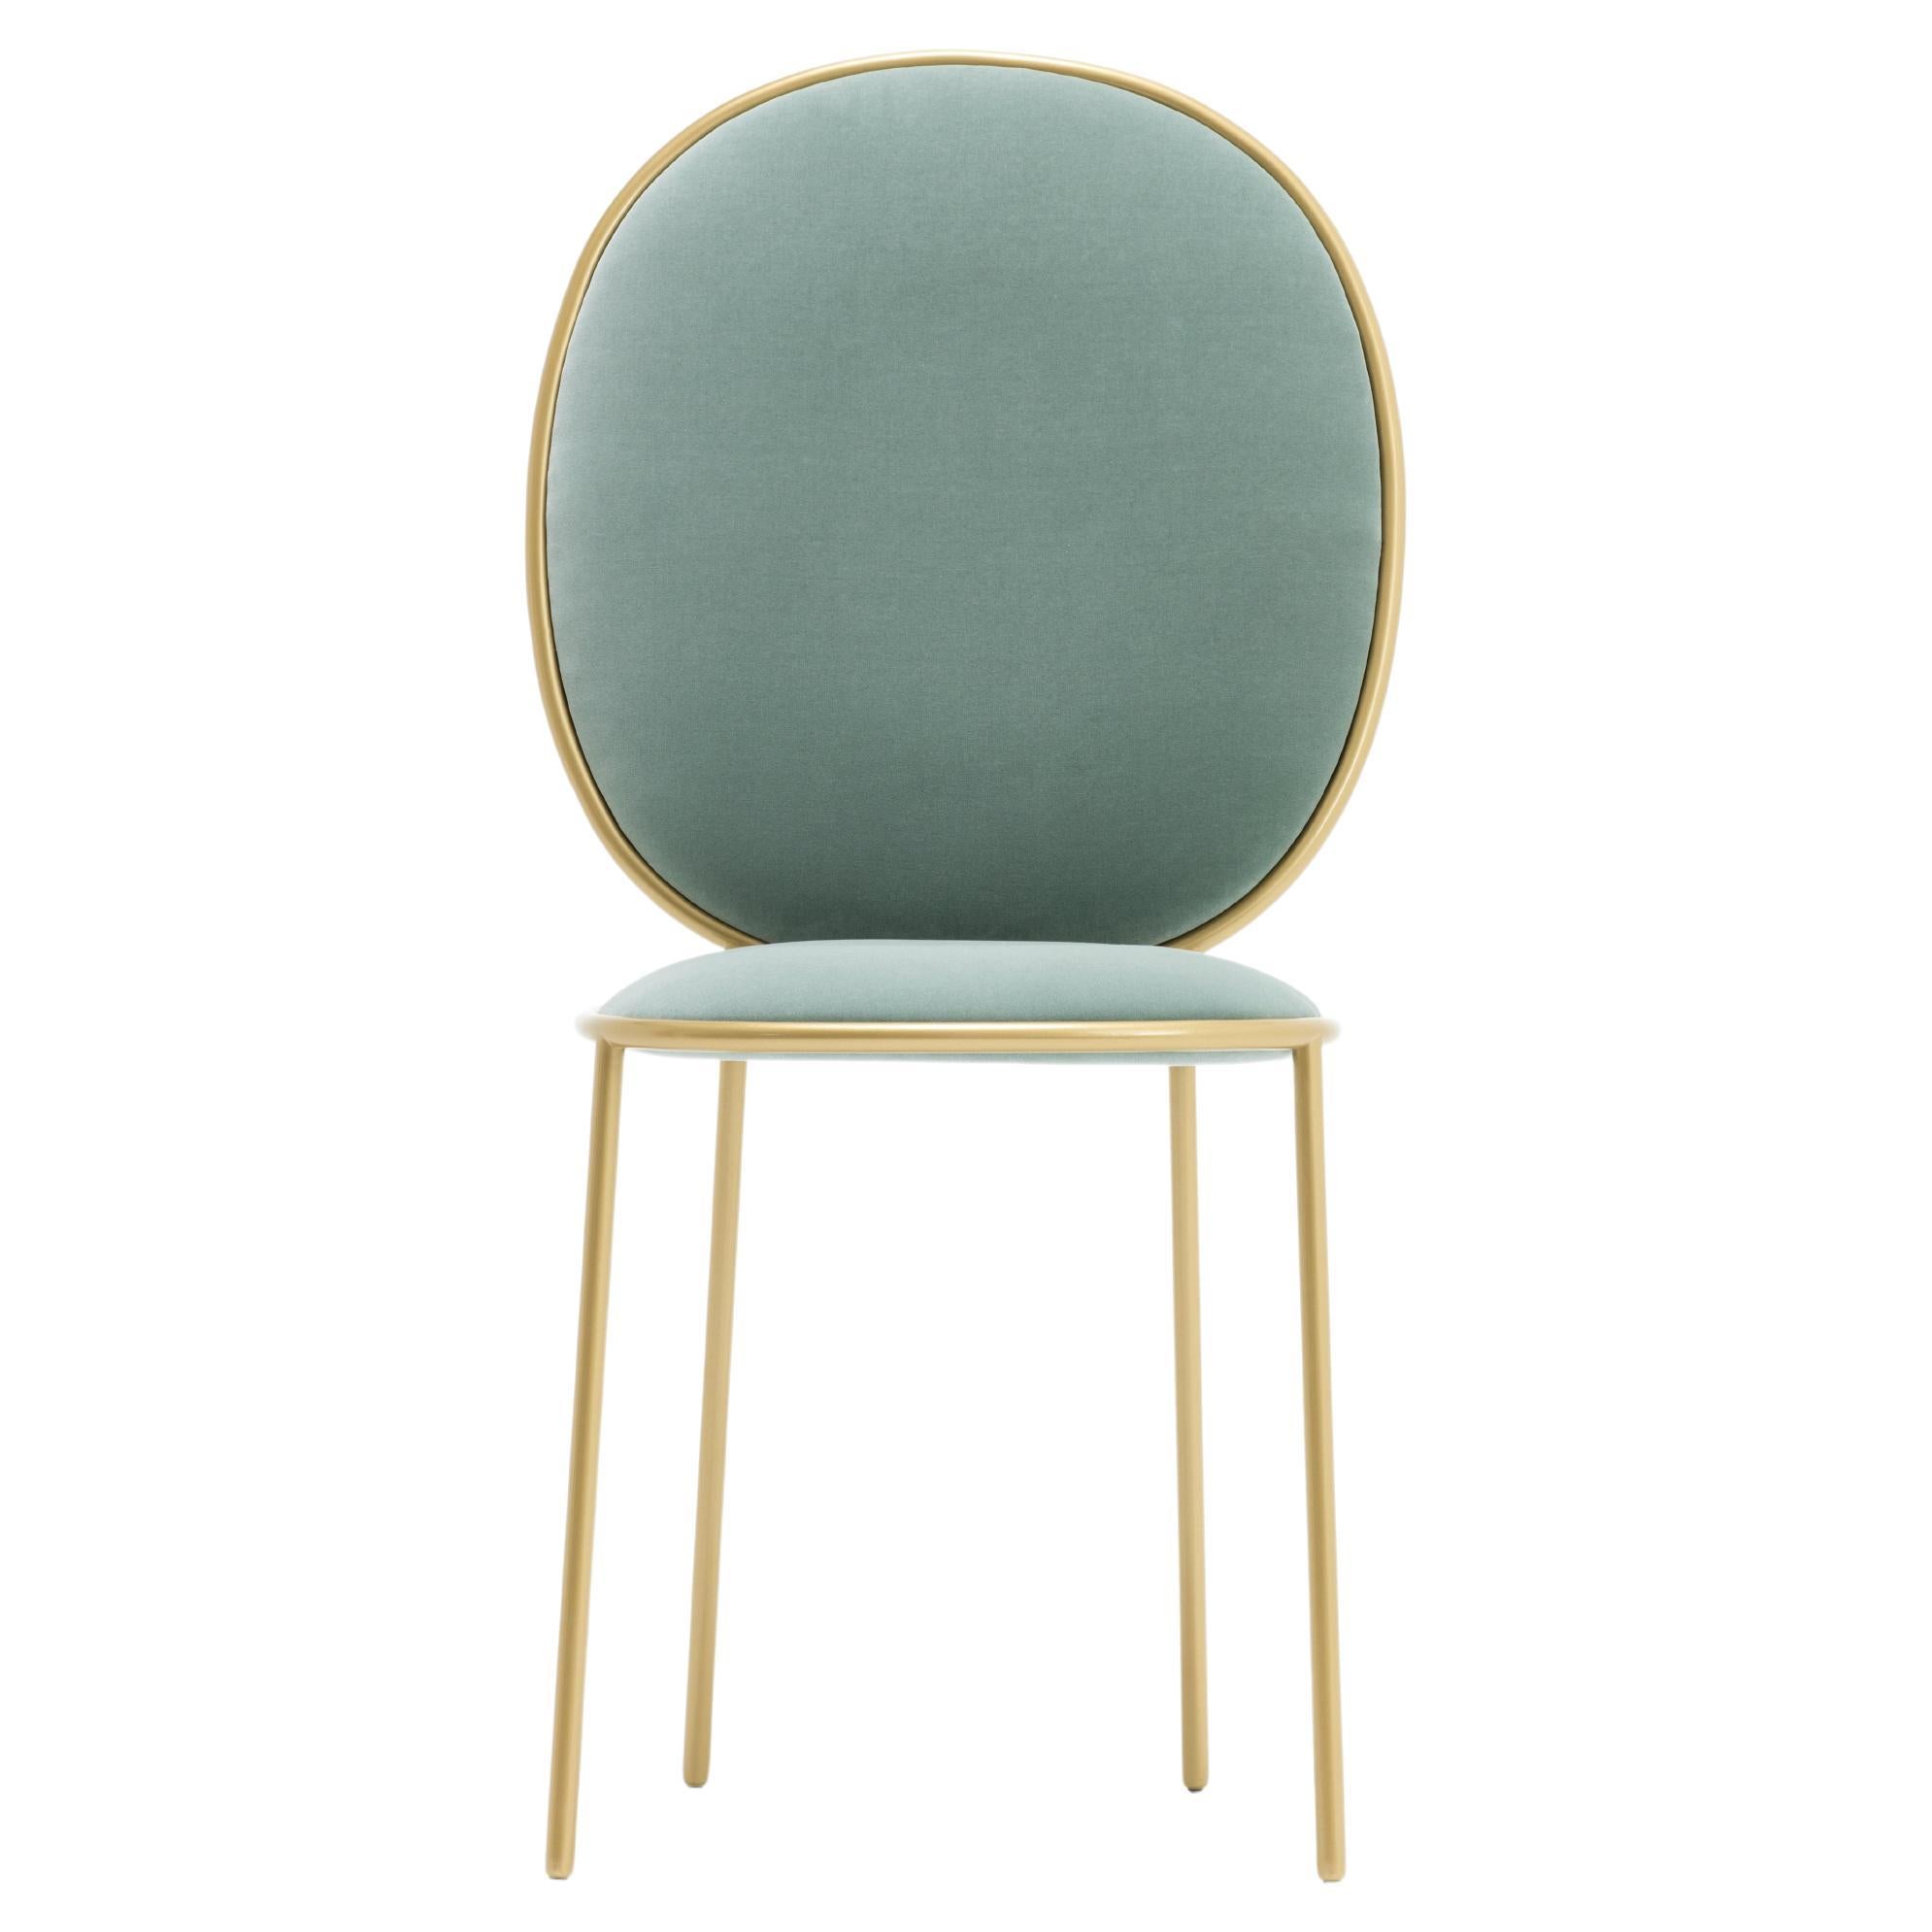 Contemporary Green Velvet Upholstered Dining Chair, Stay by Nika Zupanc